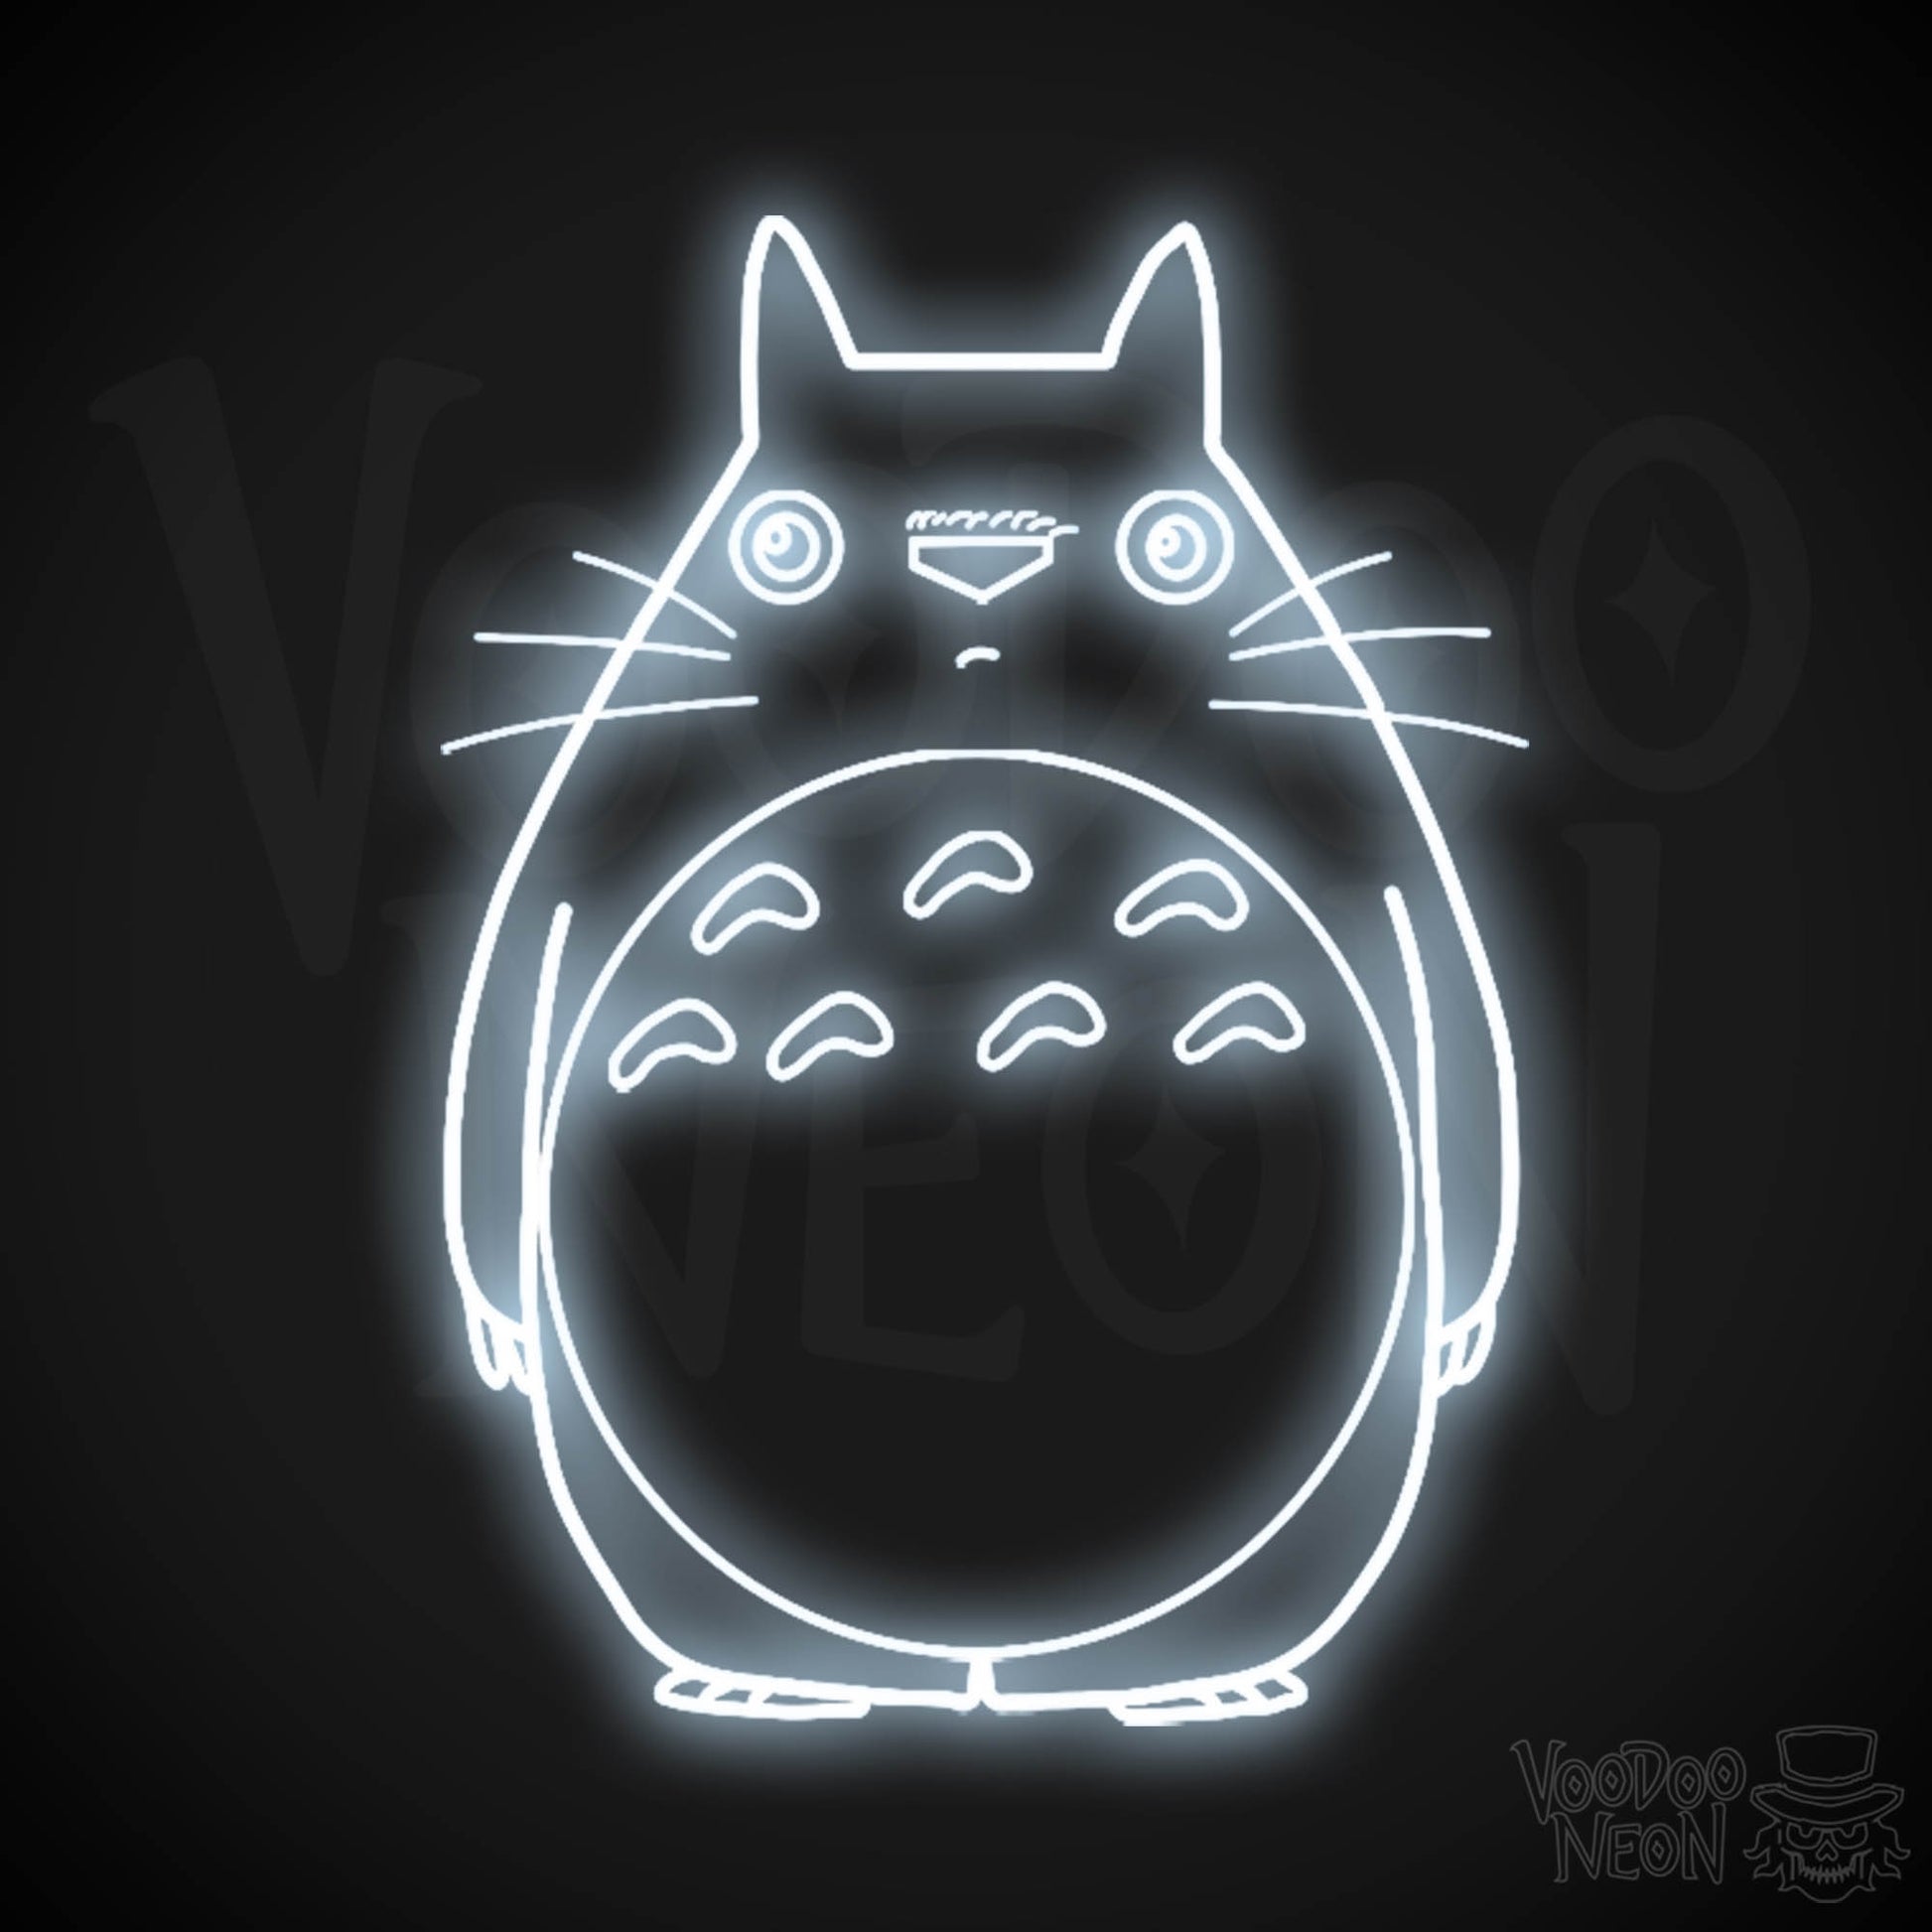 Totoro Neon Wall Art - Neon Totoro Sign - Totoro Neon Sign - LED Wall Art - Color Cool White